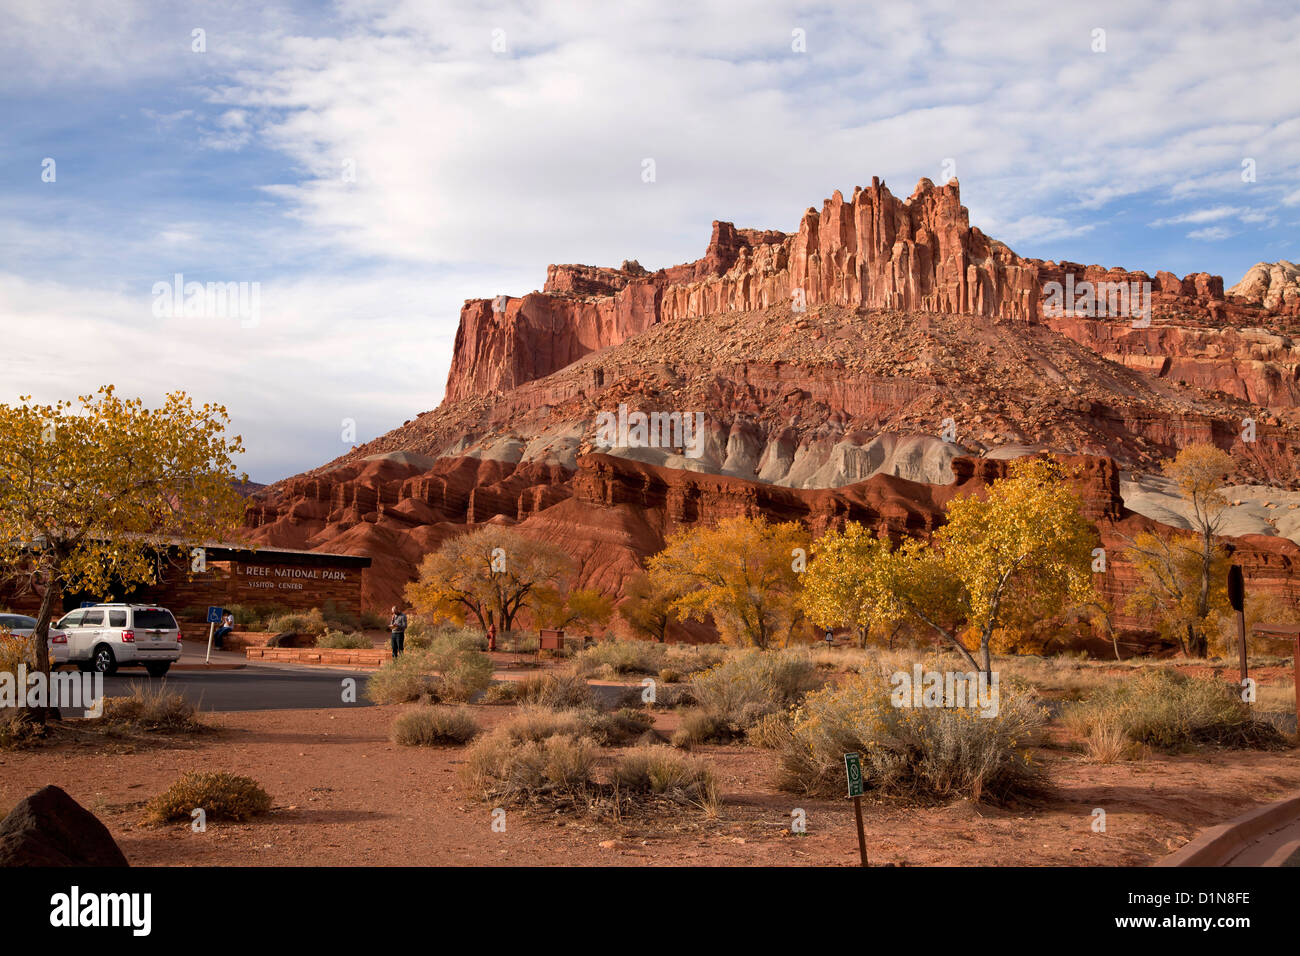 visitor center and Rock formations at Capitol Reef National Park in Utah, United States of America, USA Stock Photo